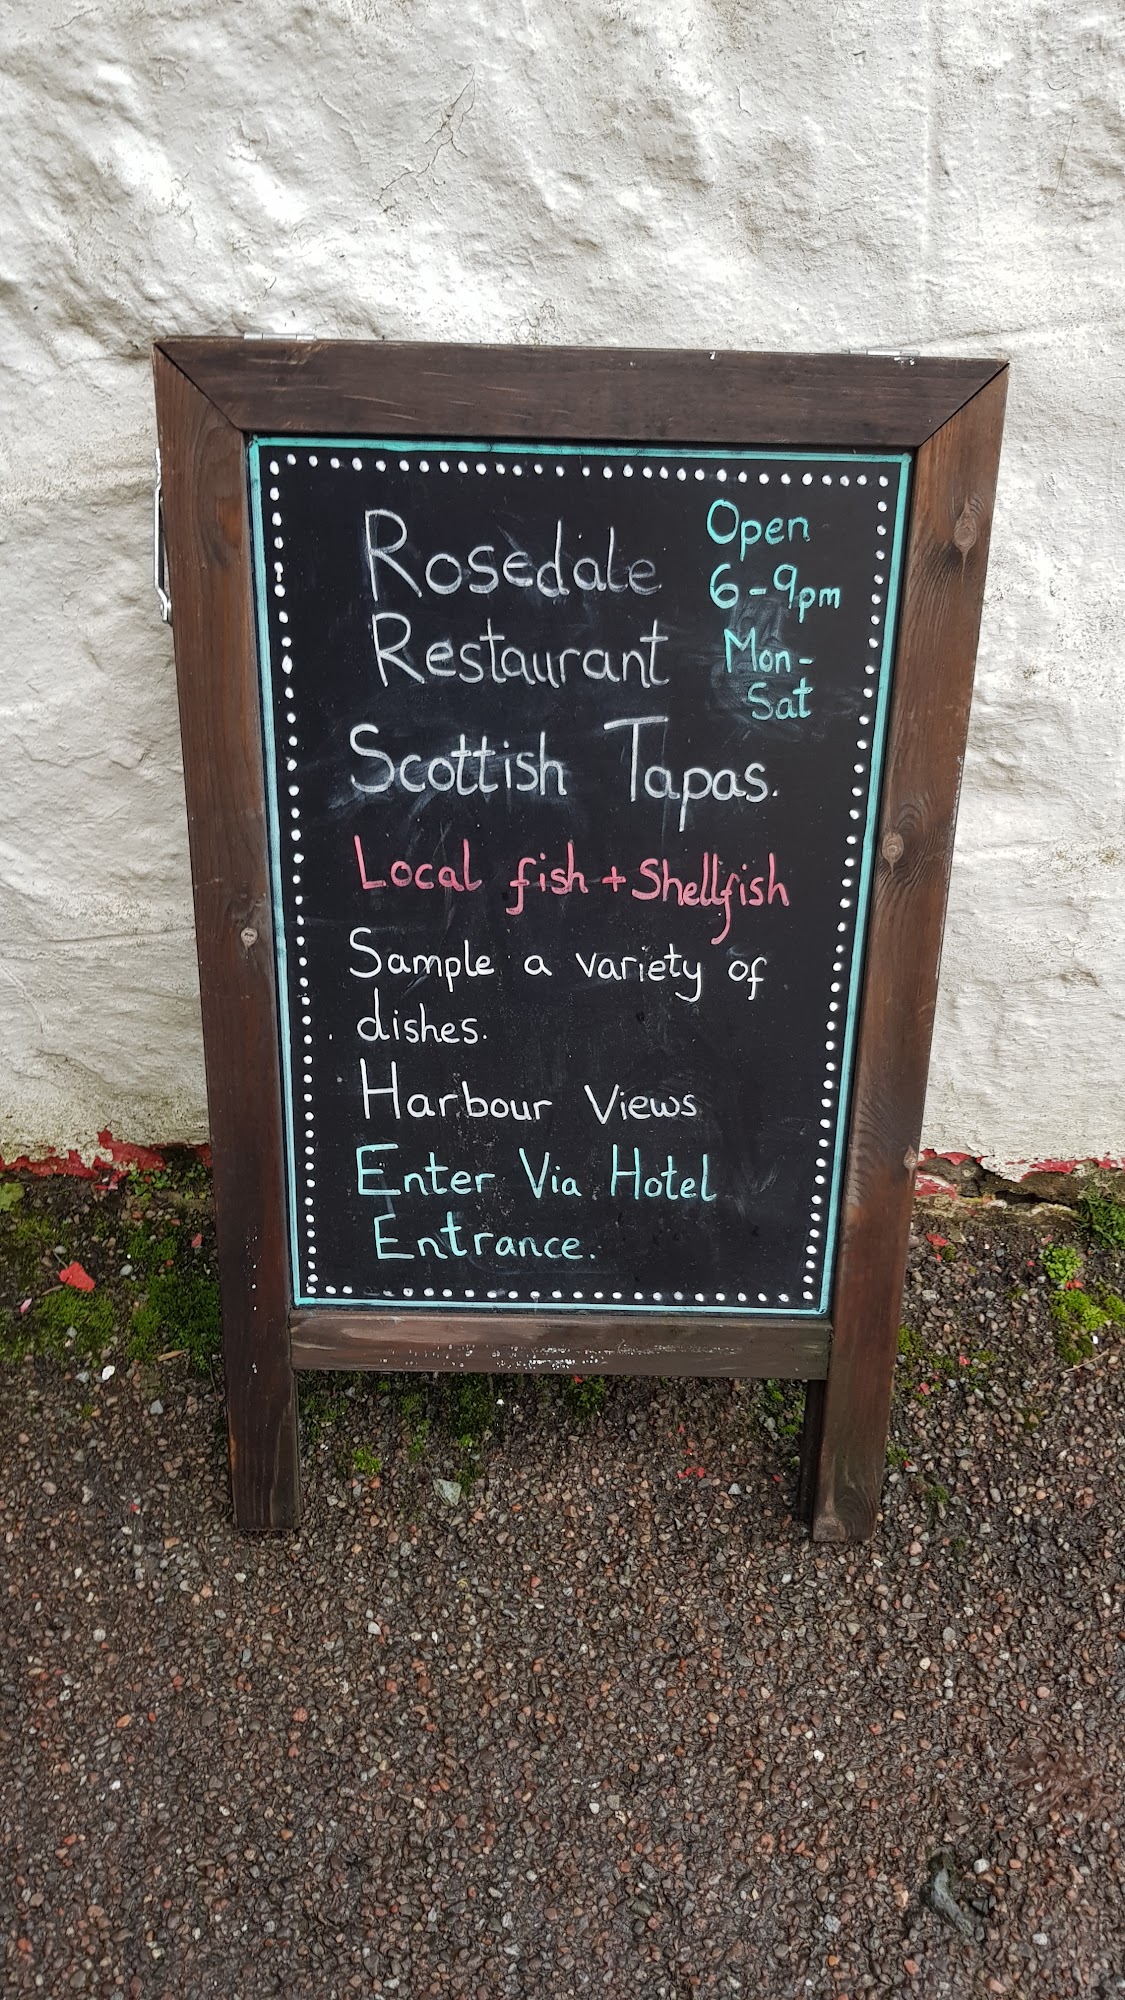 The Rosedale Hotel and Restaurant